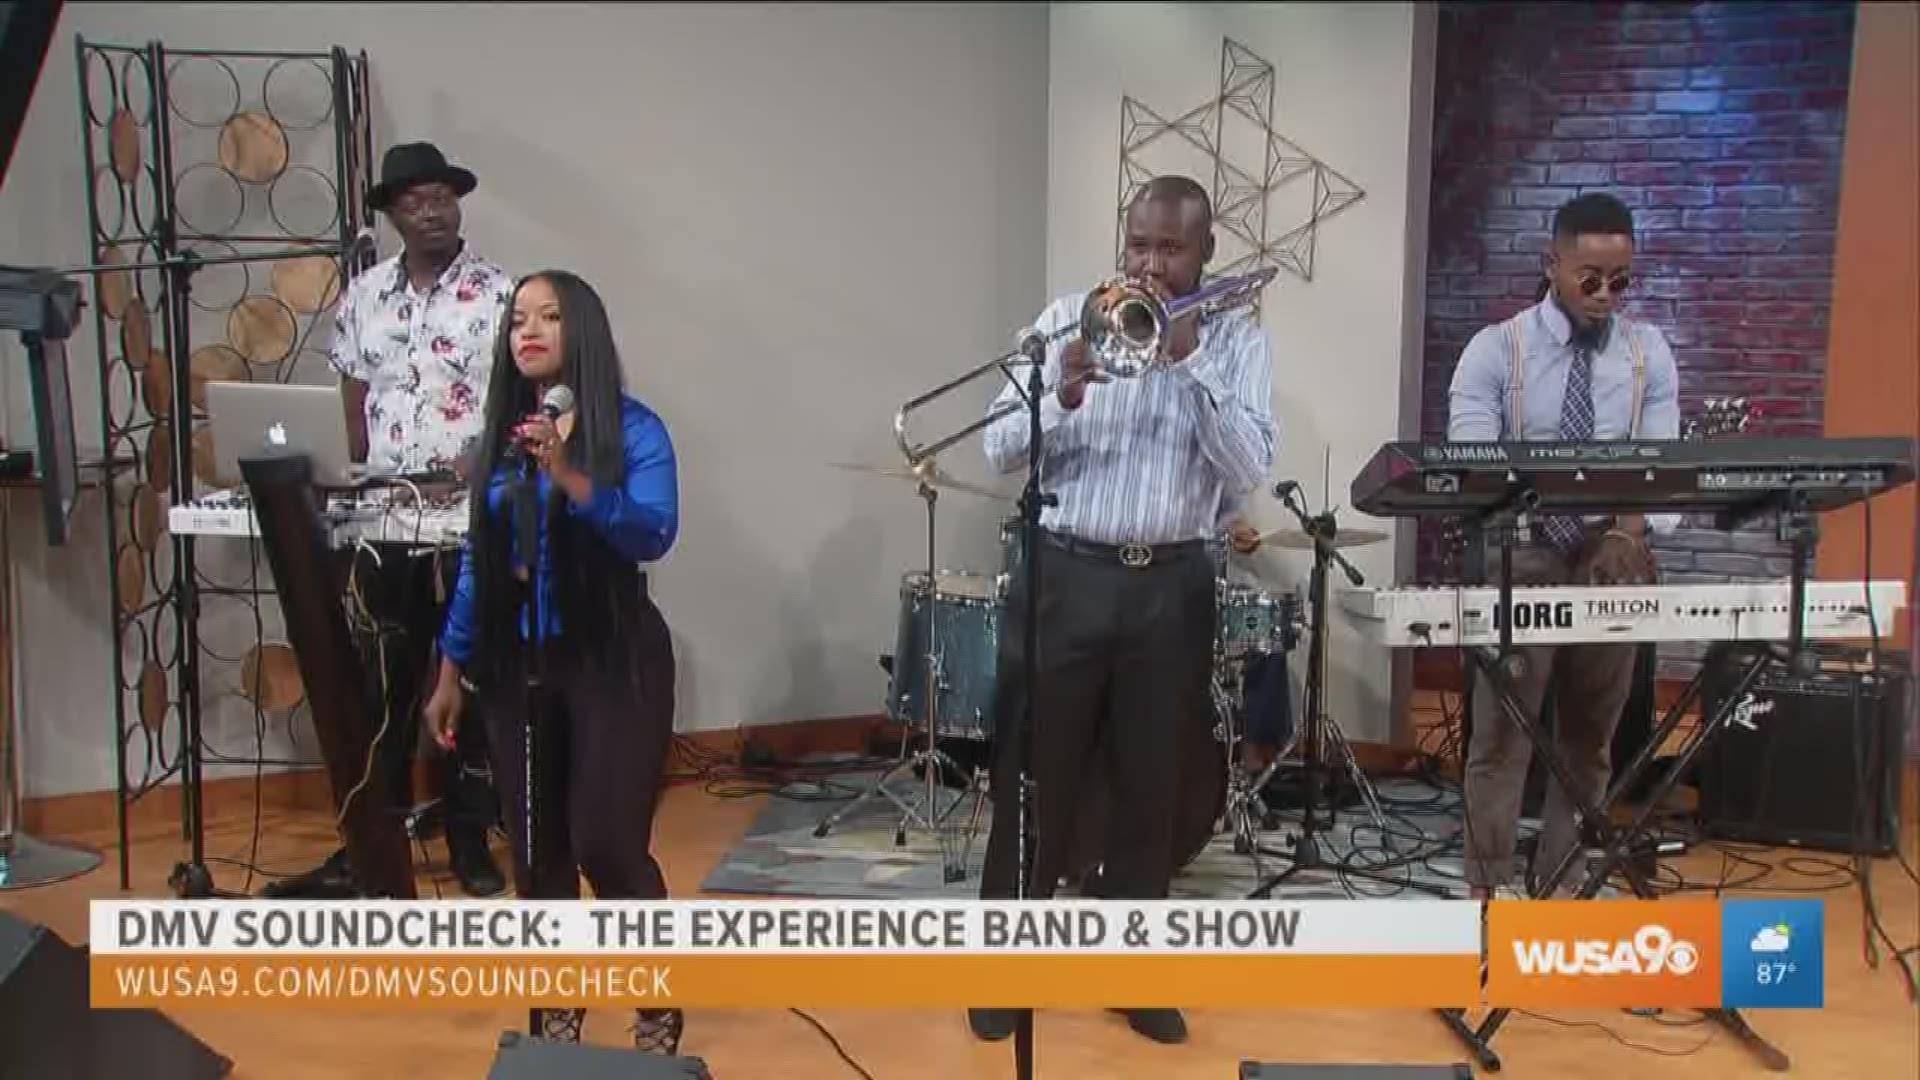 The Experience Band & Show is here to bring new elements to the DMV music scene. Singer Tameka "Micca" Watson and bandleader Travis Gardner talk about how the band came to be and their influences. Like what you heard? The band will be performing live at The Big Chief July 19. For more details on this performance and other DMV Soundcheck artists, go to wusa9.com/dmvsoundcheck.